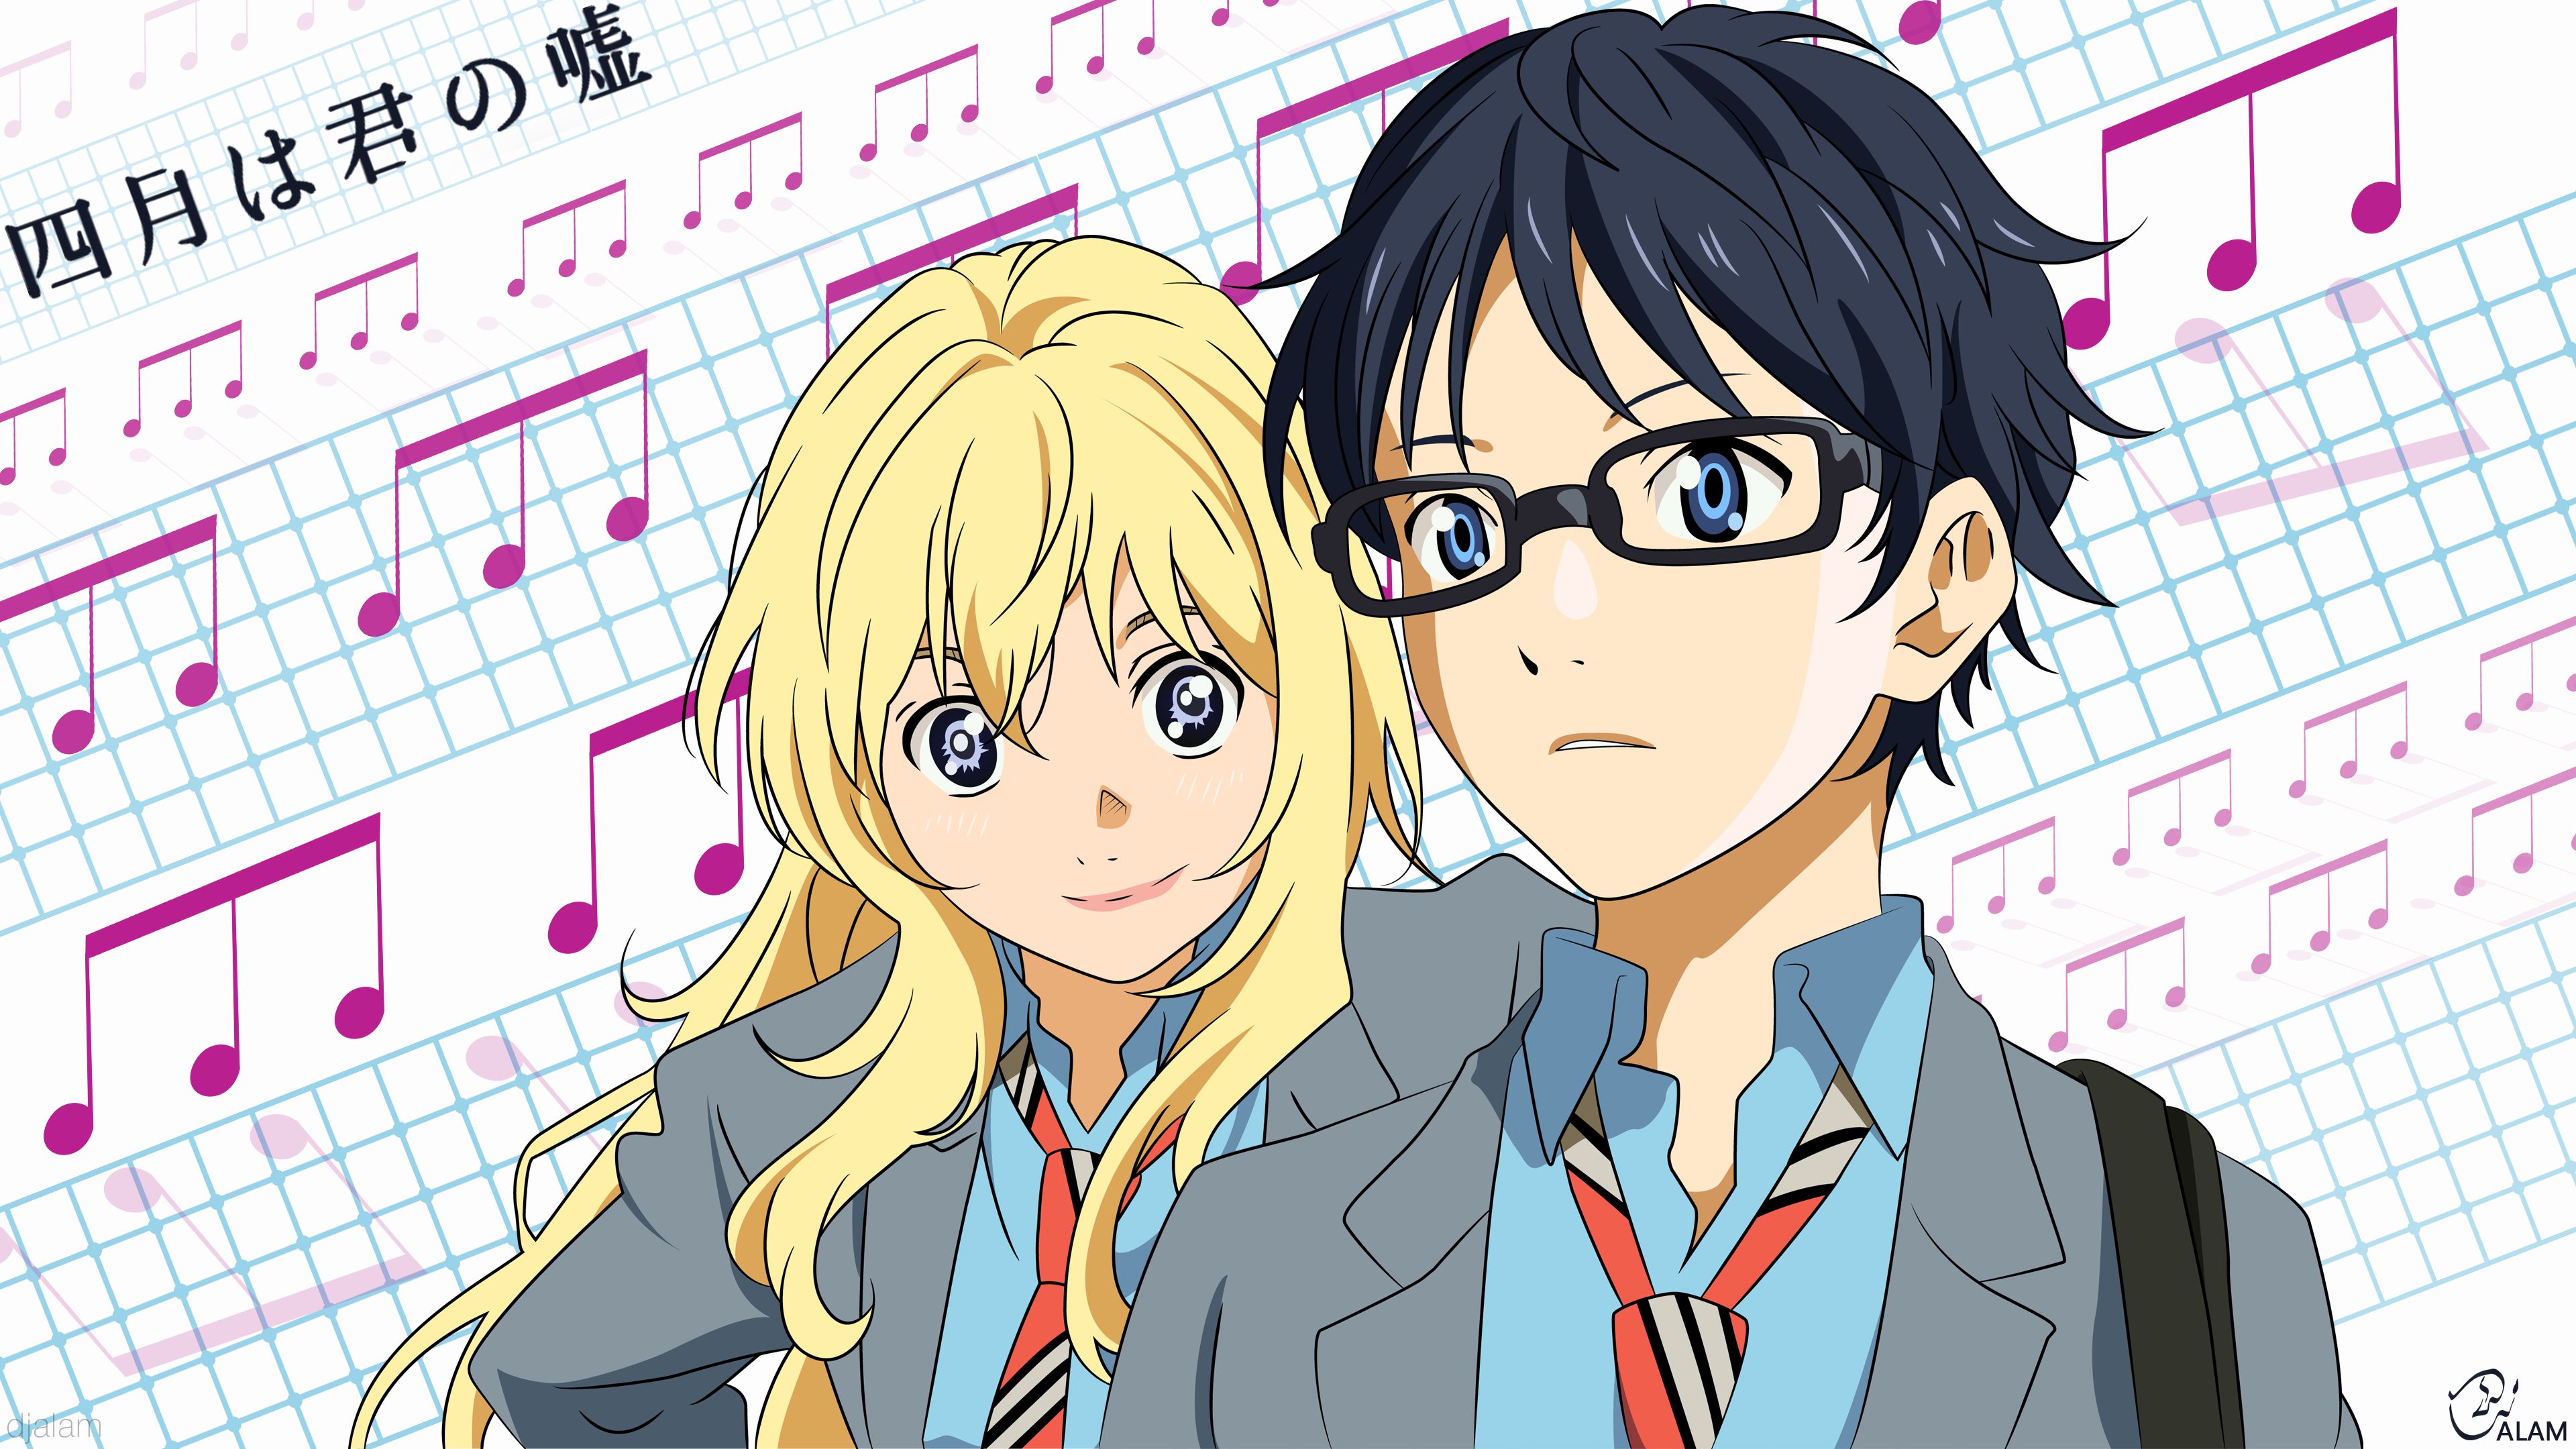 3. "Kousei and Kaori from Your Lie in April" - wide 5